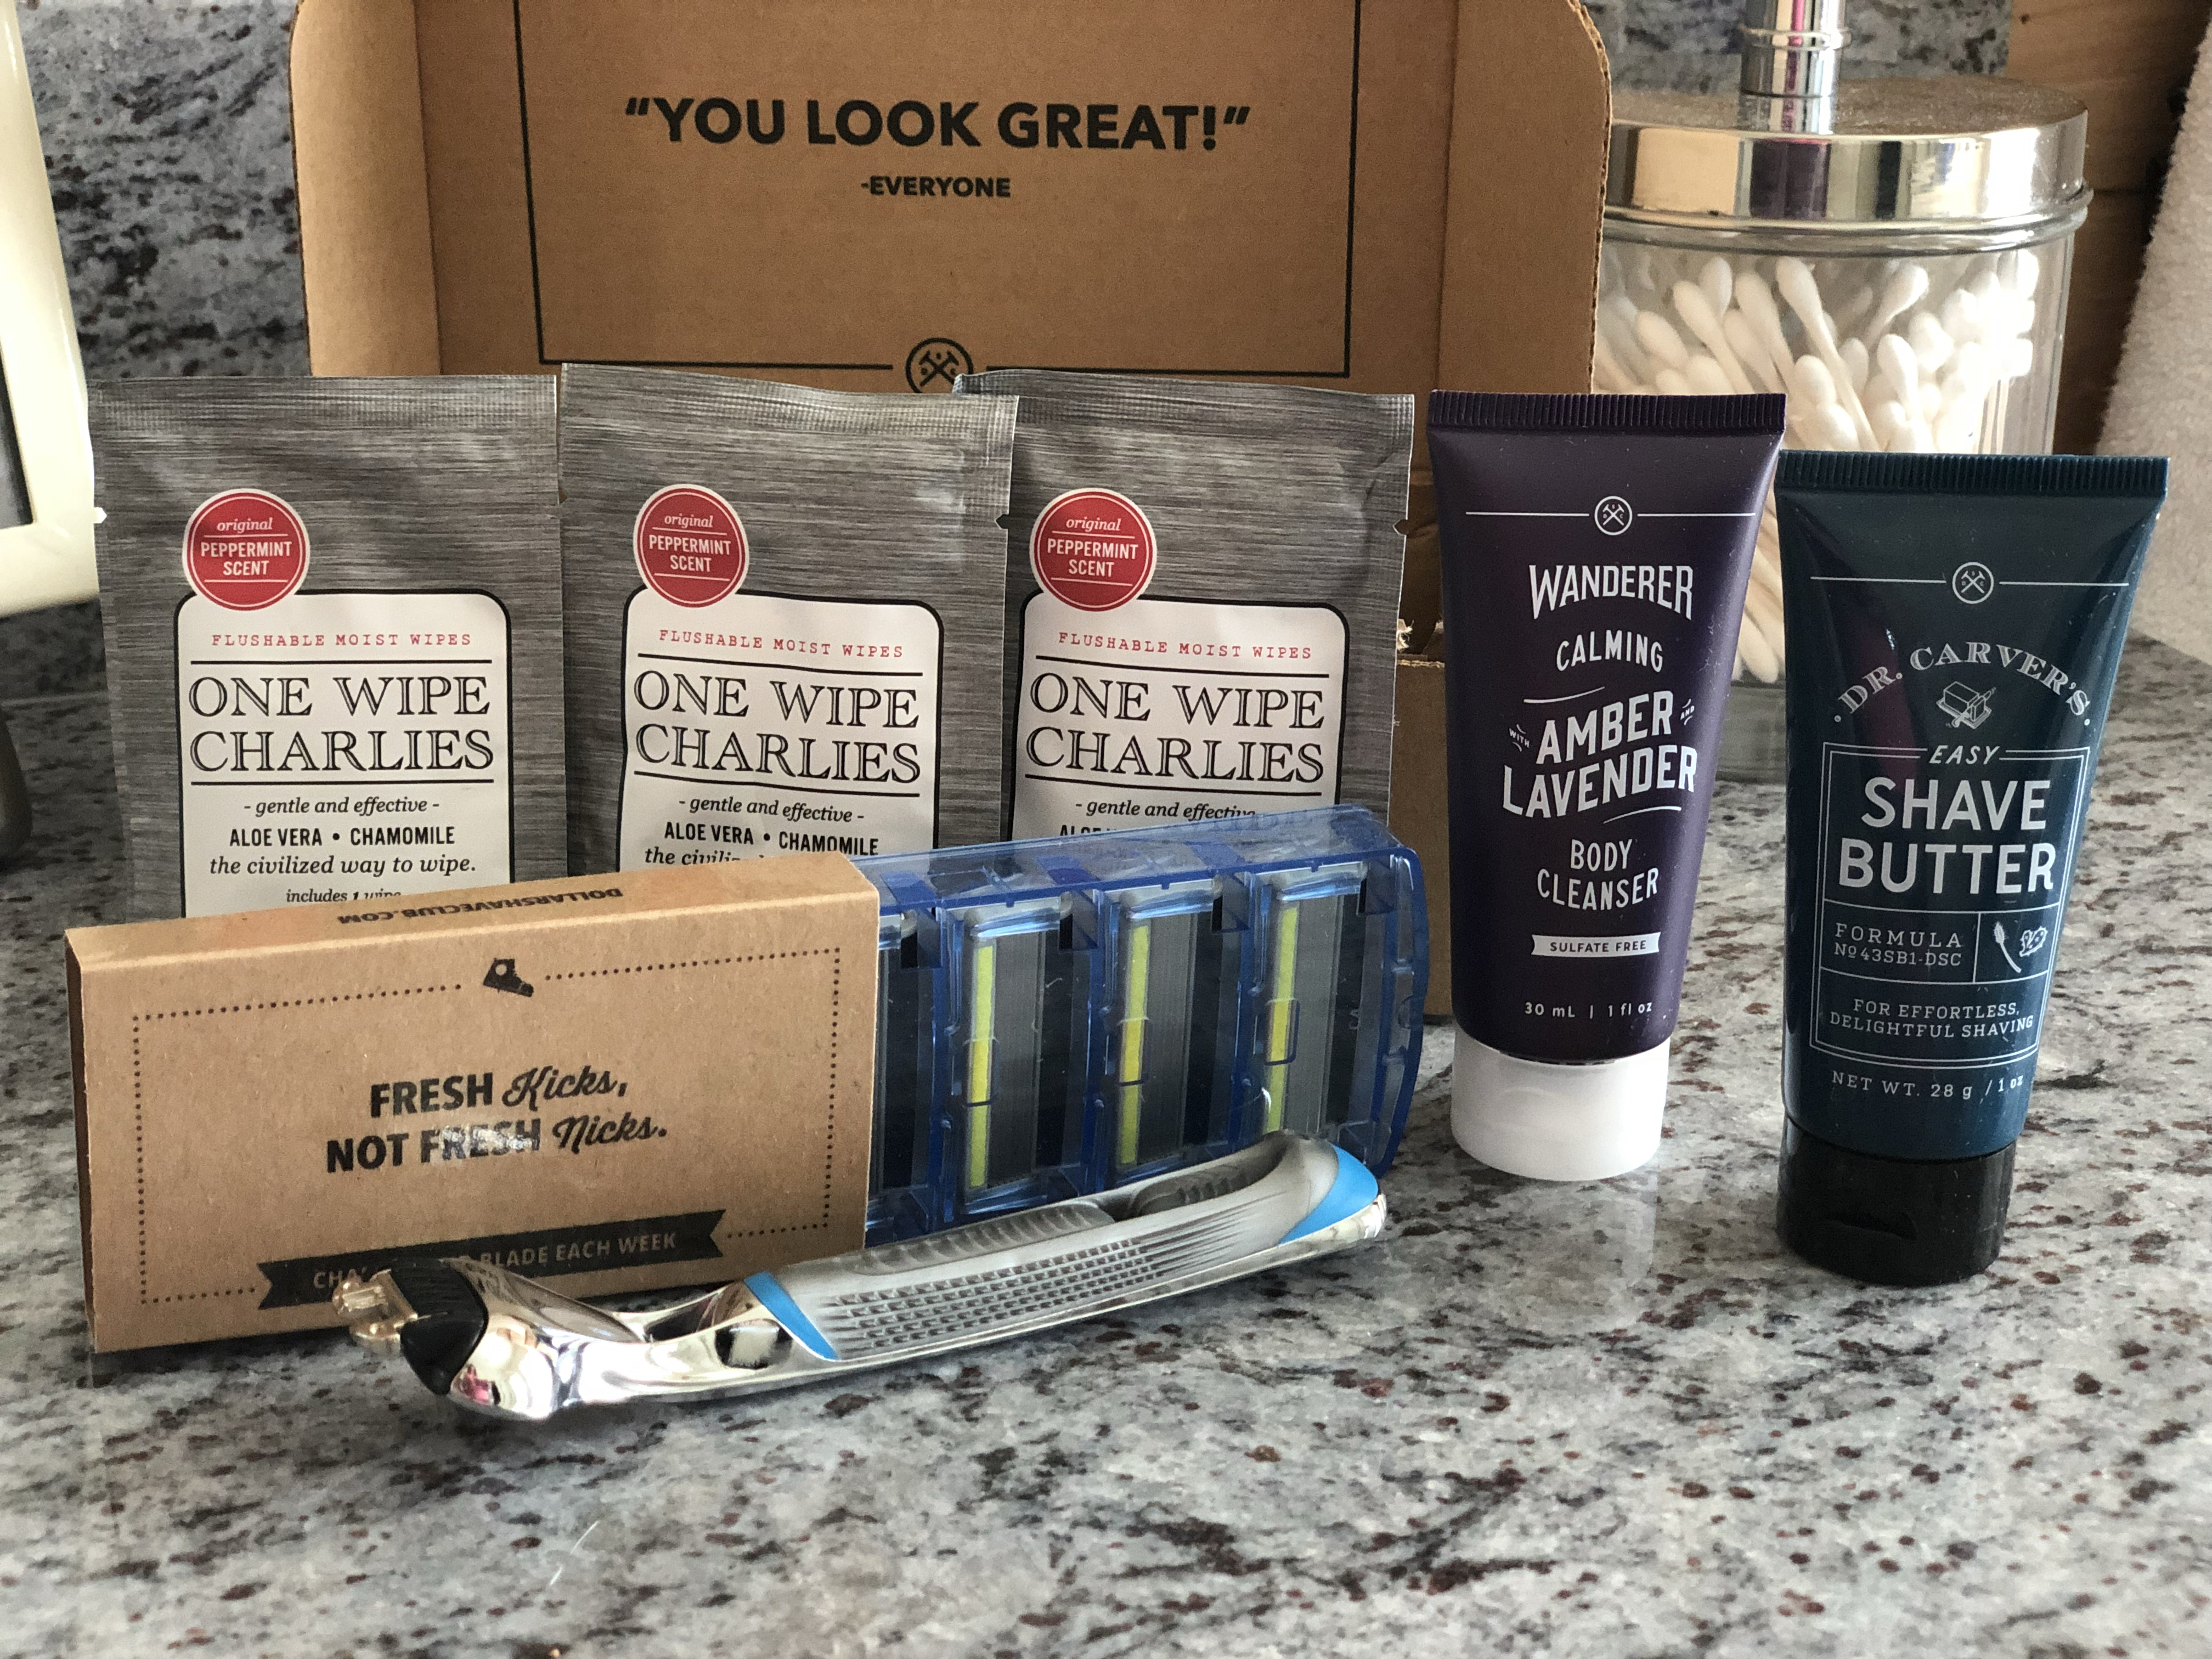 Dollar Shave Club $5 Kit Deal – everything that comes in the $5 kit, including razors, and shaver, and lotion